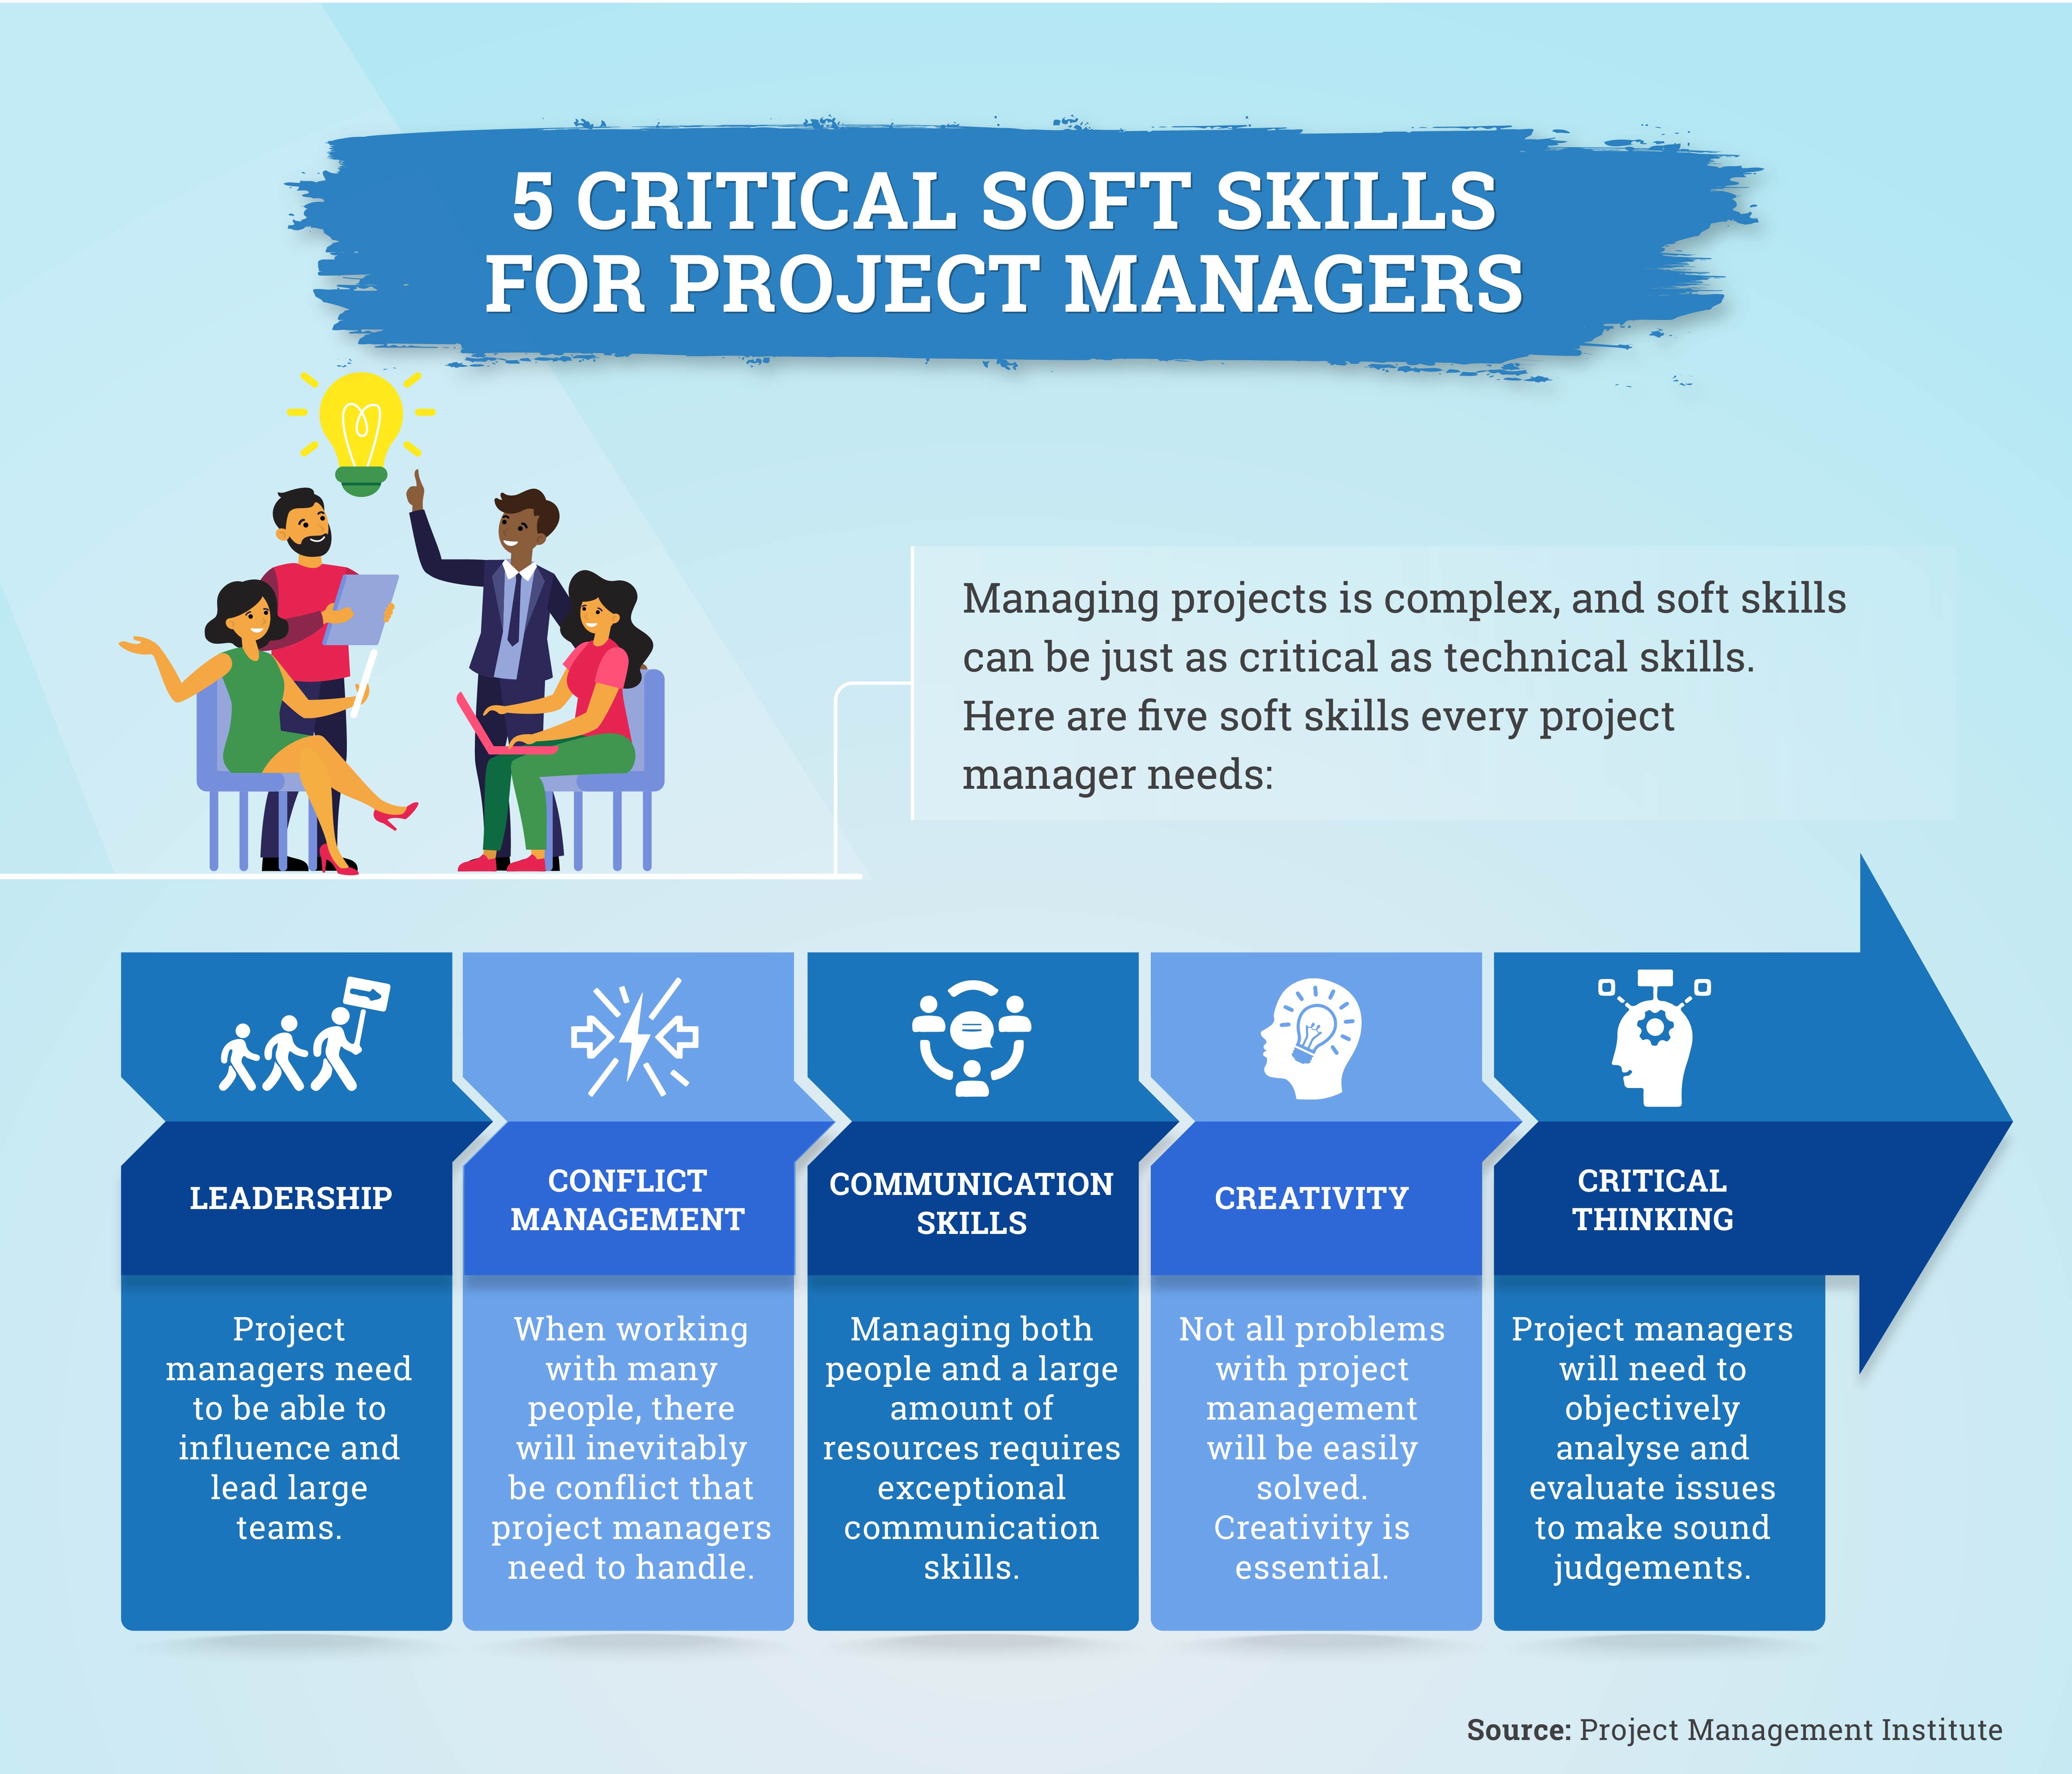 A list of five soft skills critical for project managers.